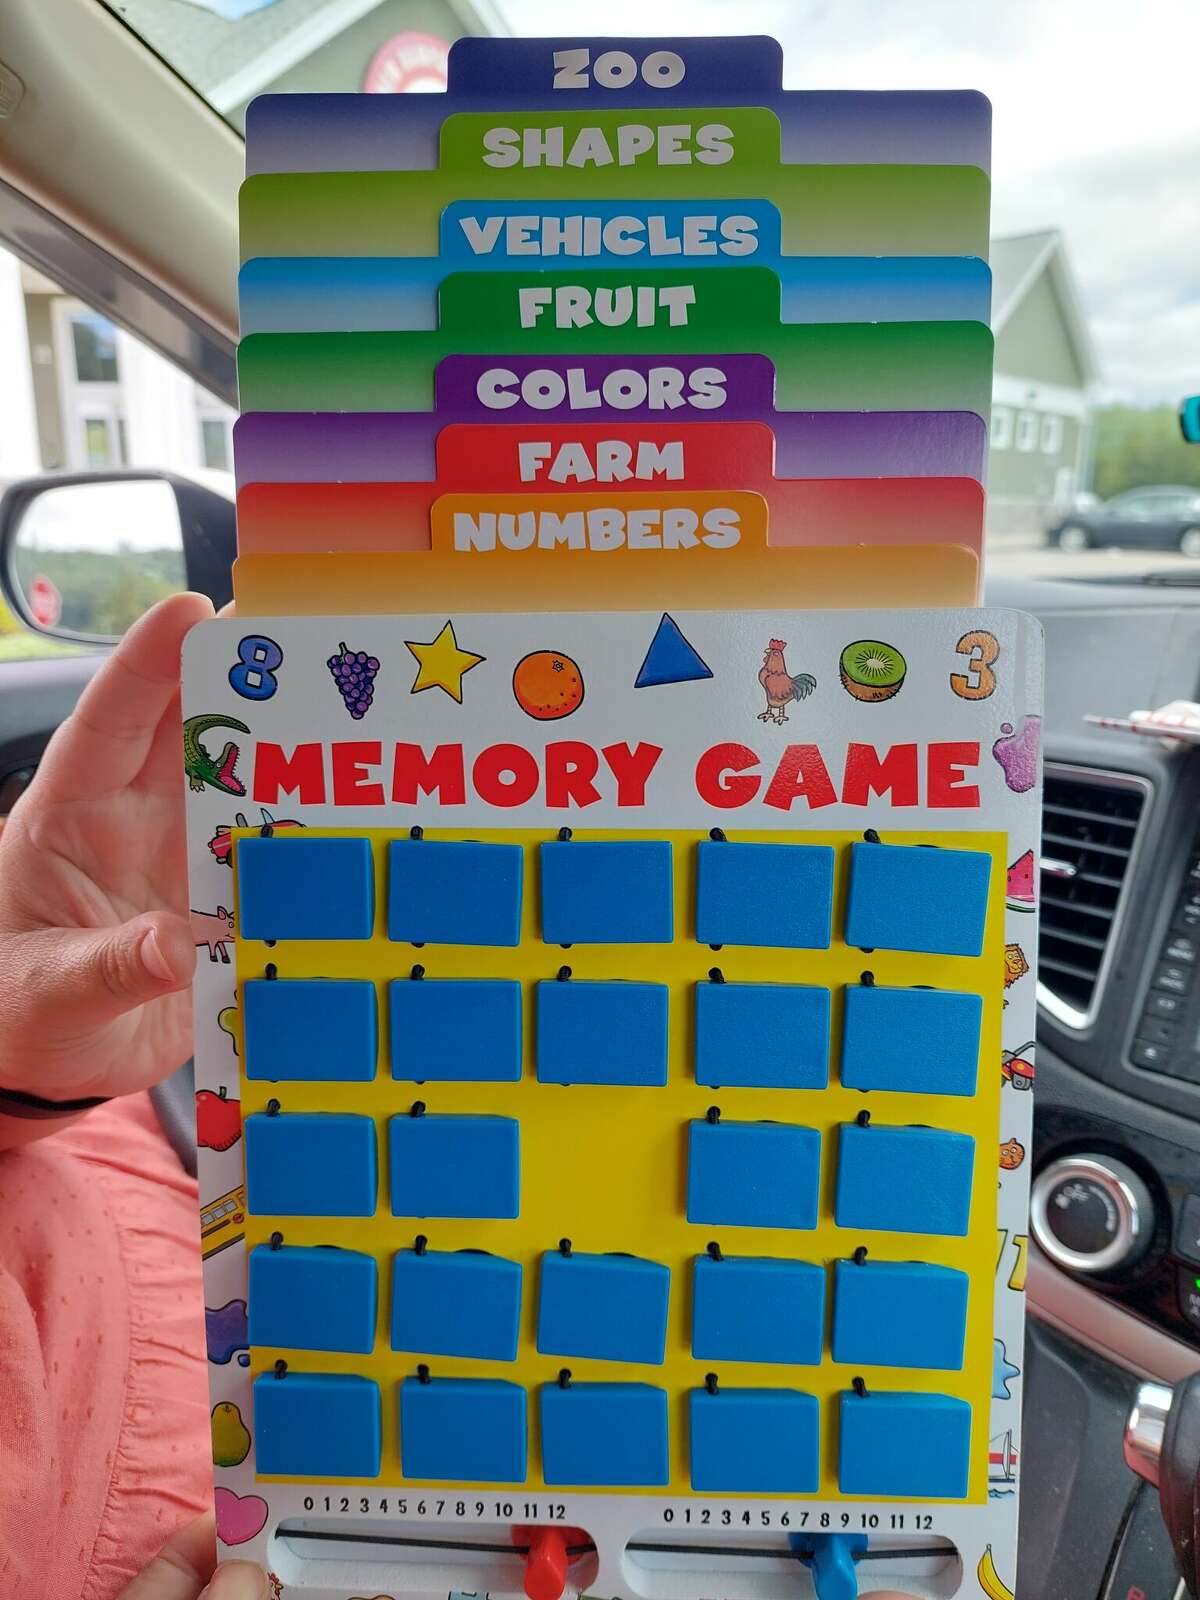 Melissa and Dove reveal to win the travel memory game